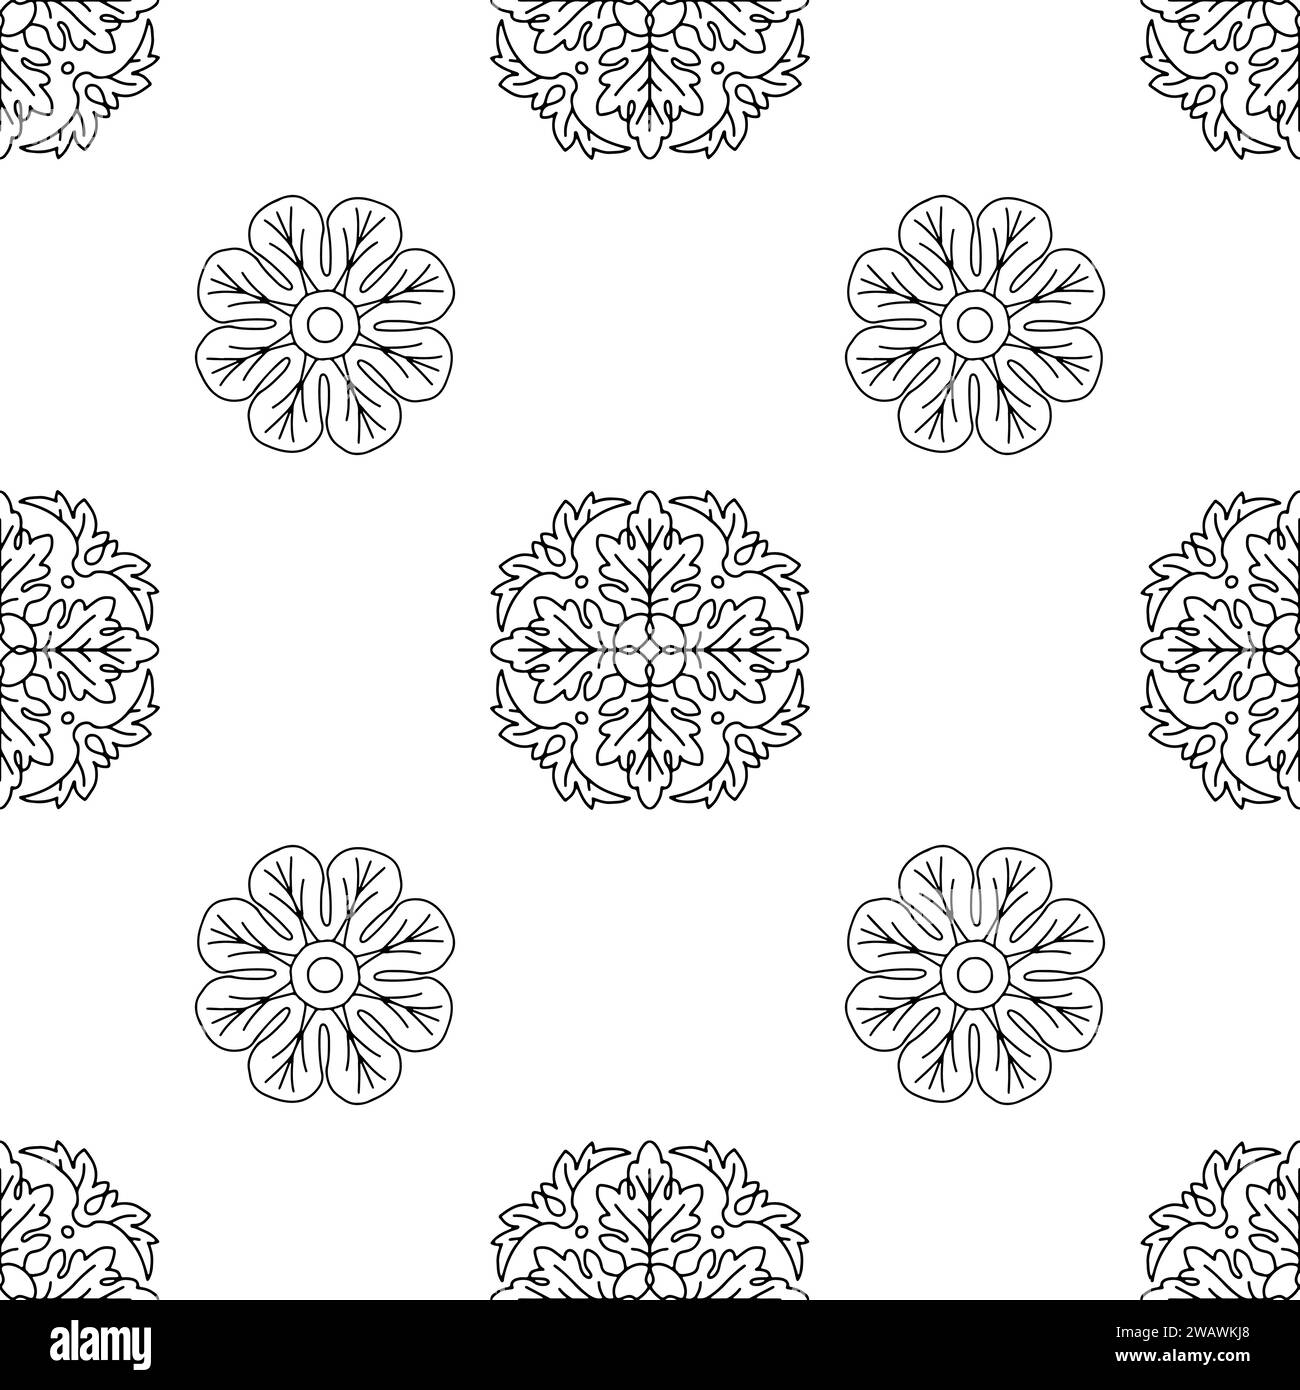 Seamless pattern with hand drawn linear classic floral rosettes Stock Vector